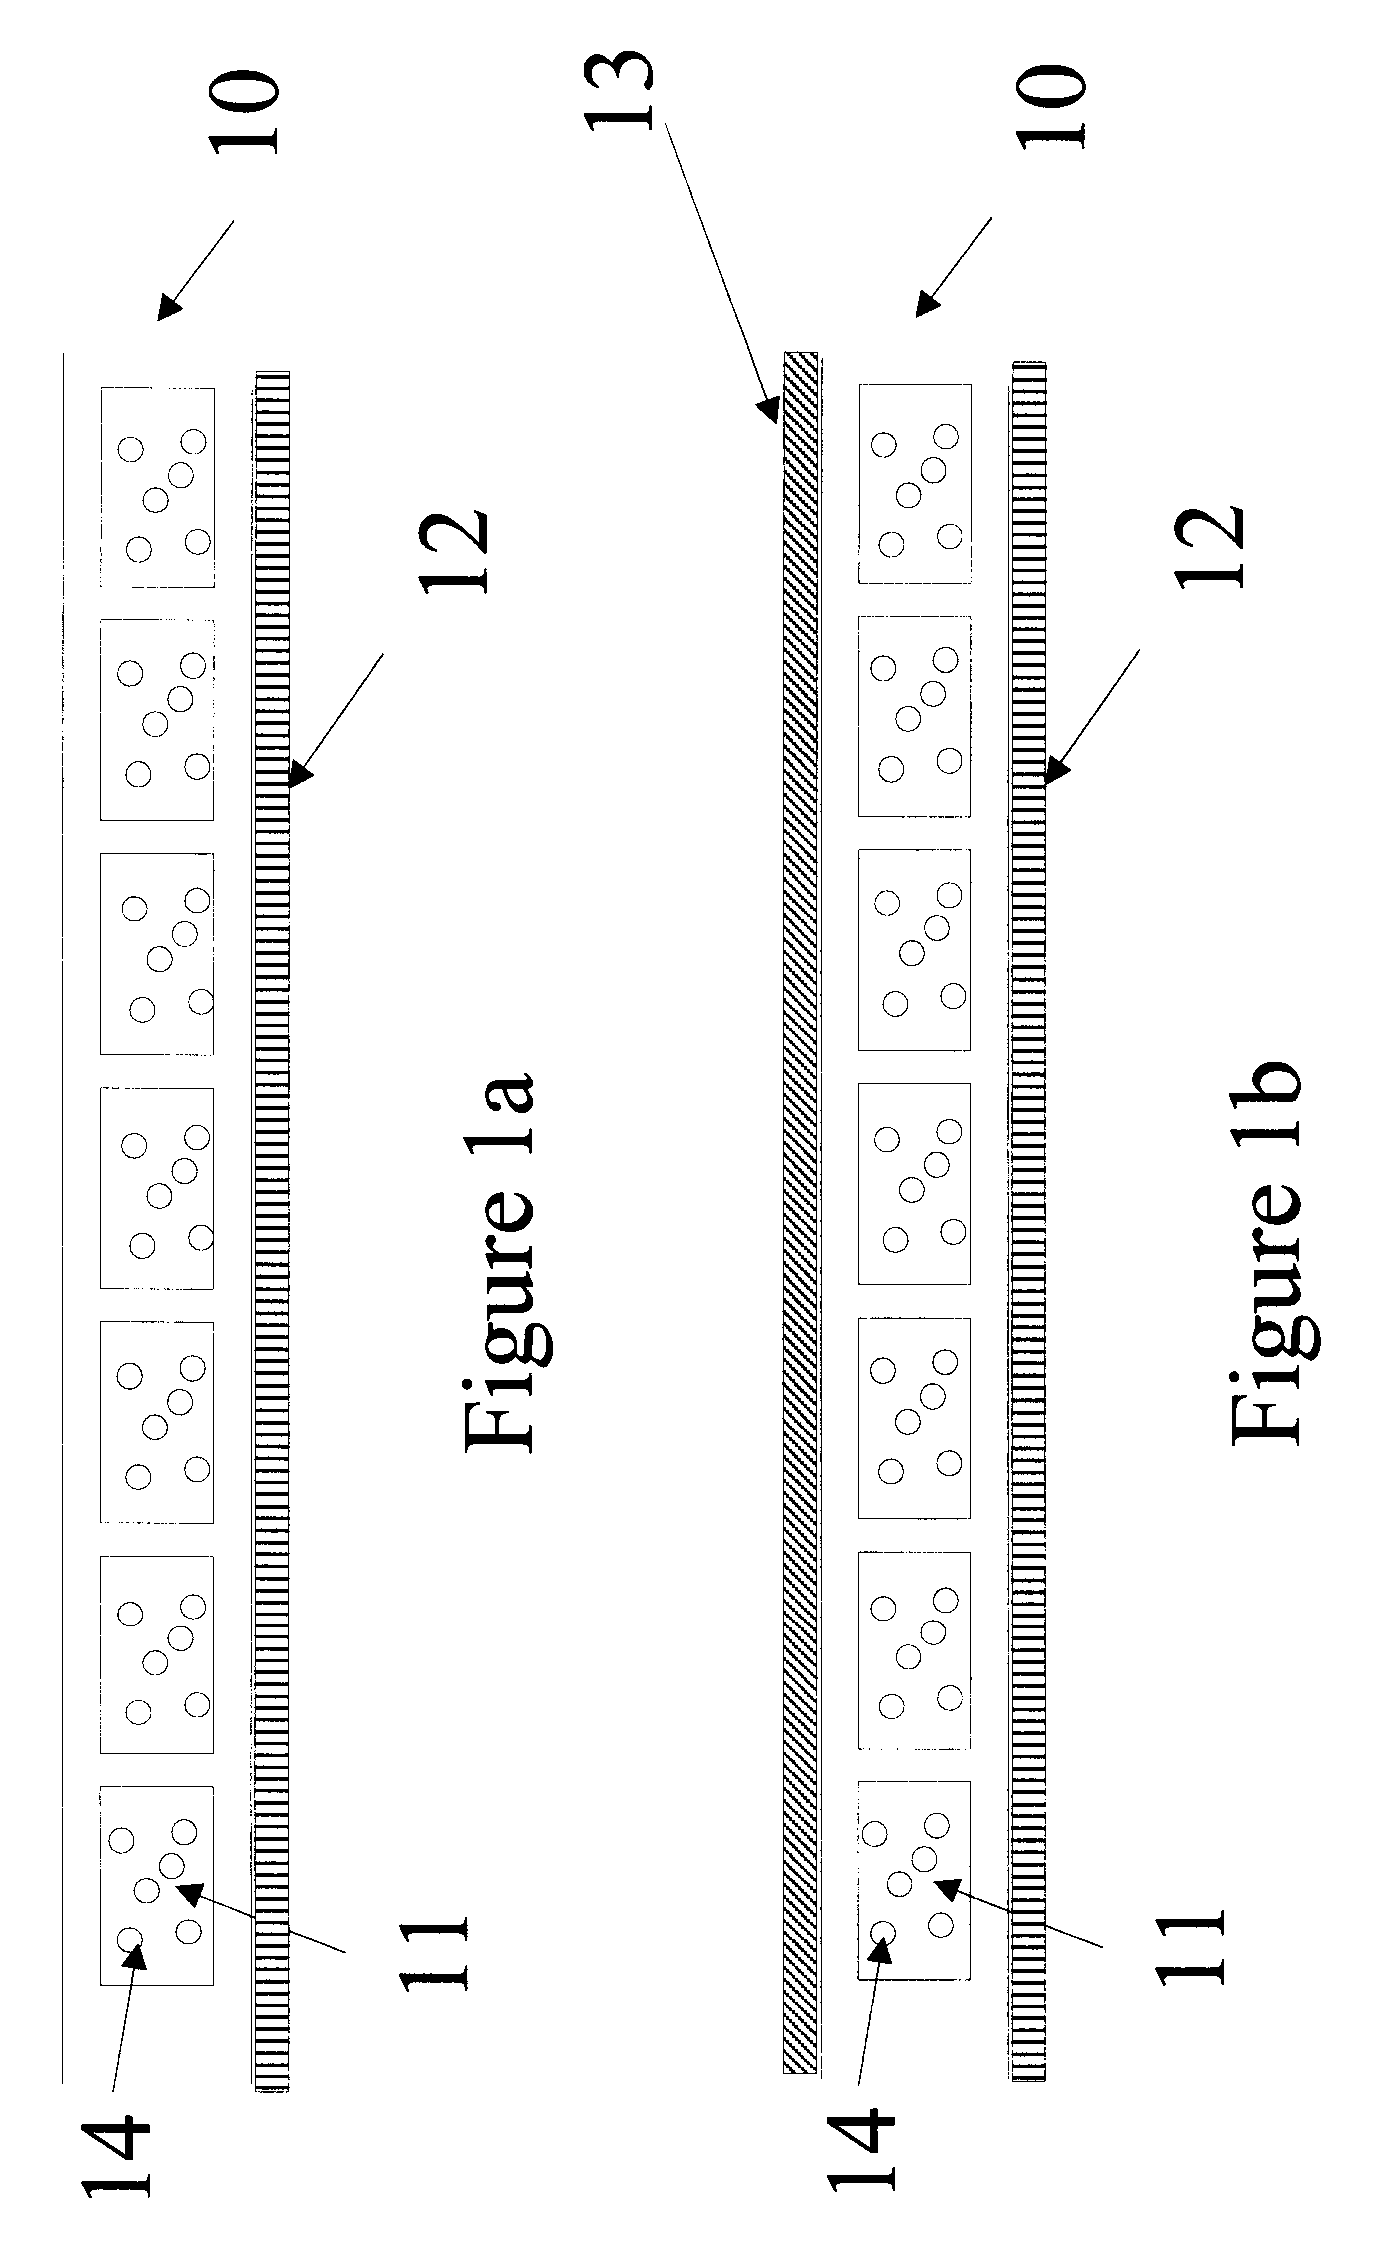 Inspection methods for defects in electrophoretic display and related devices